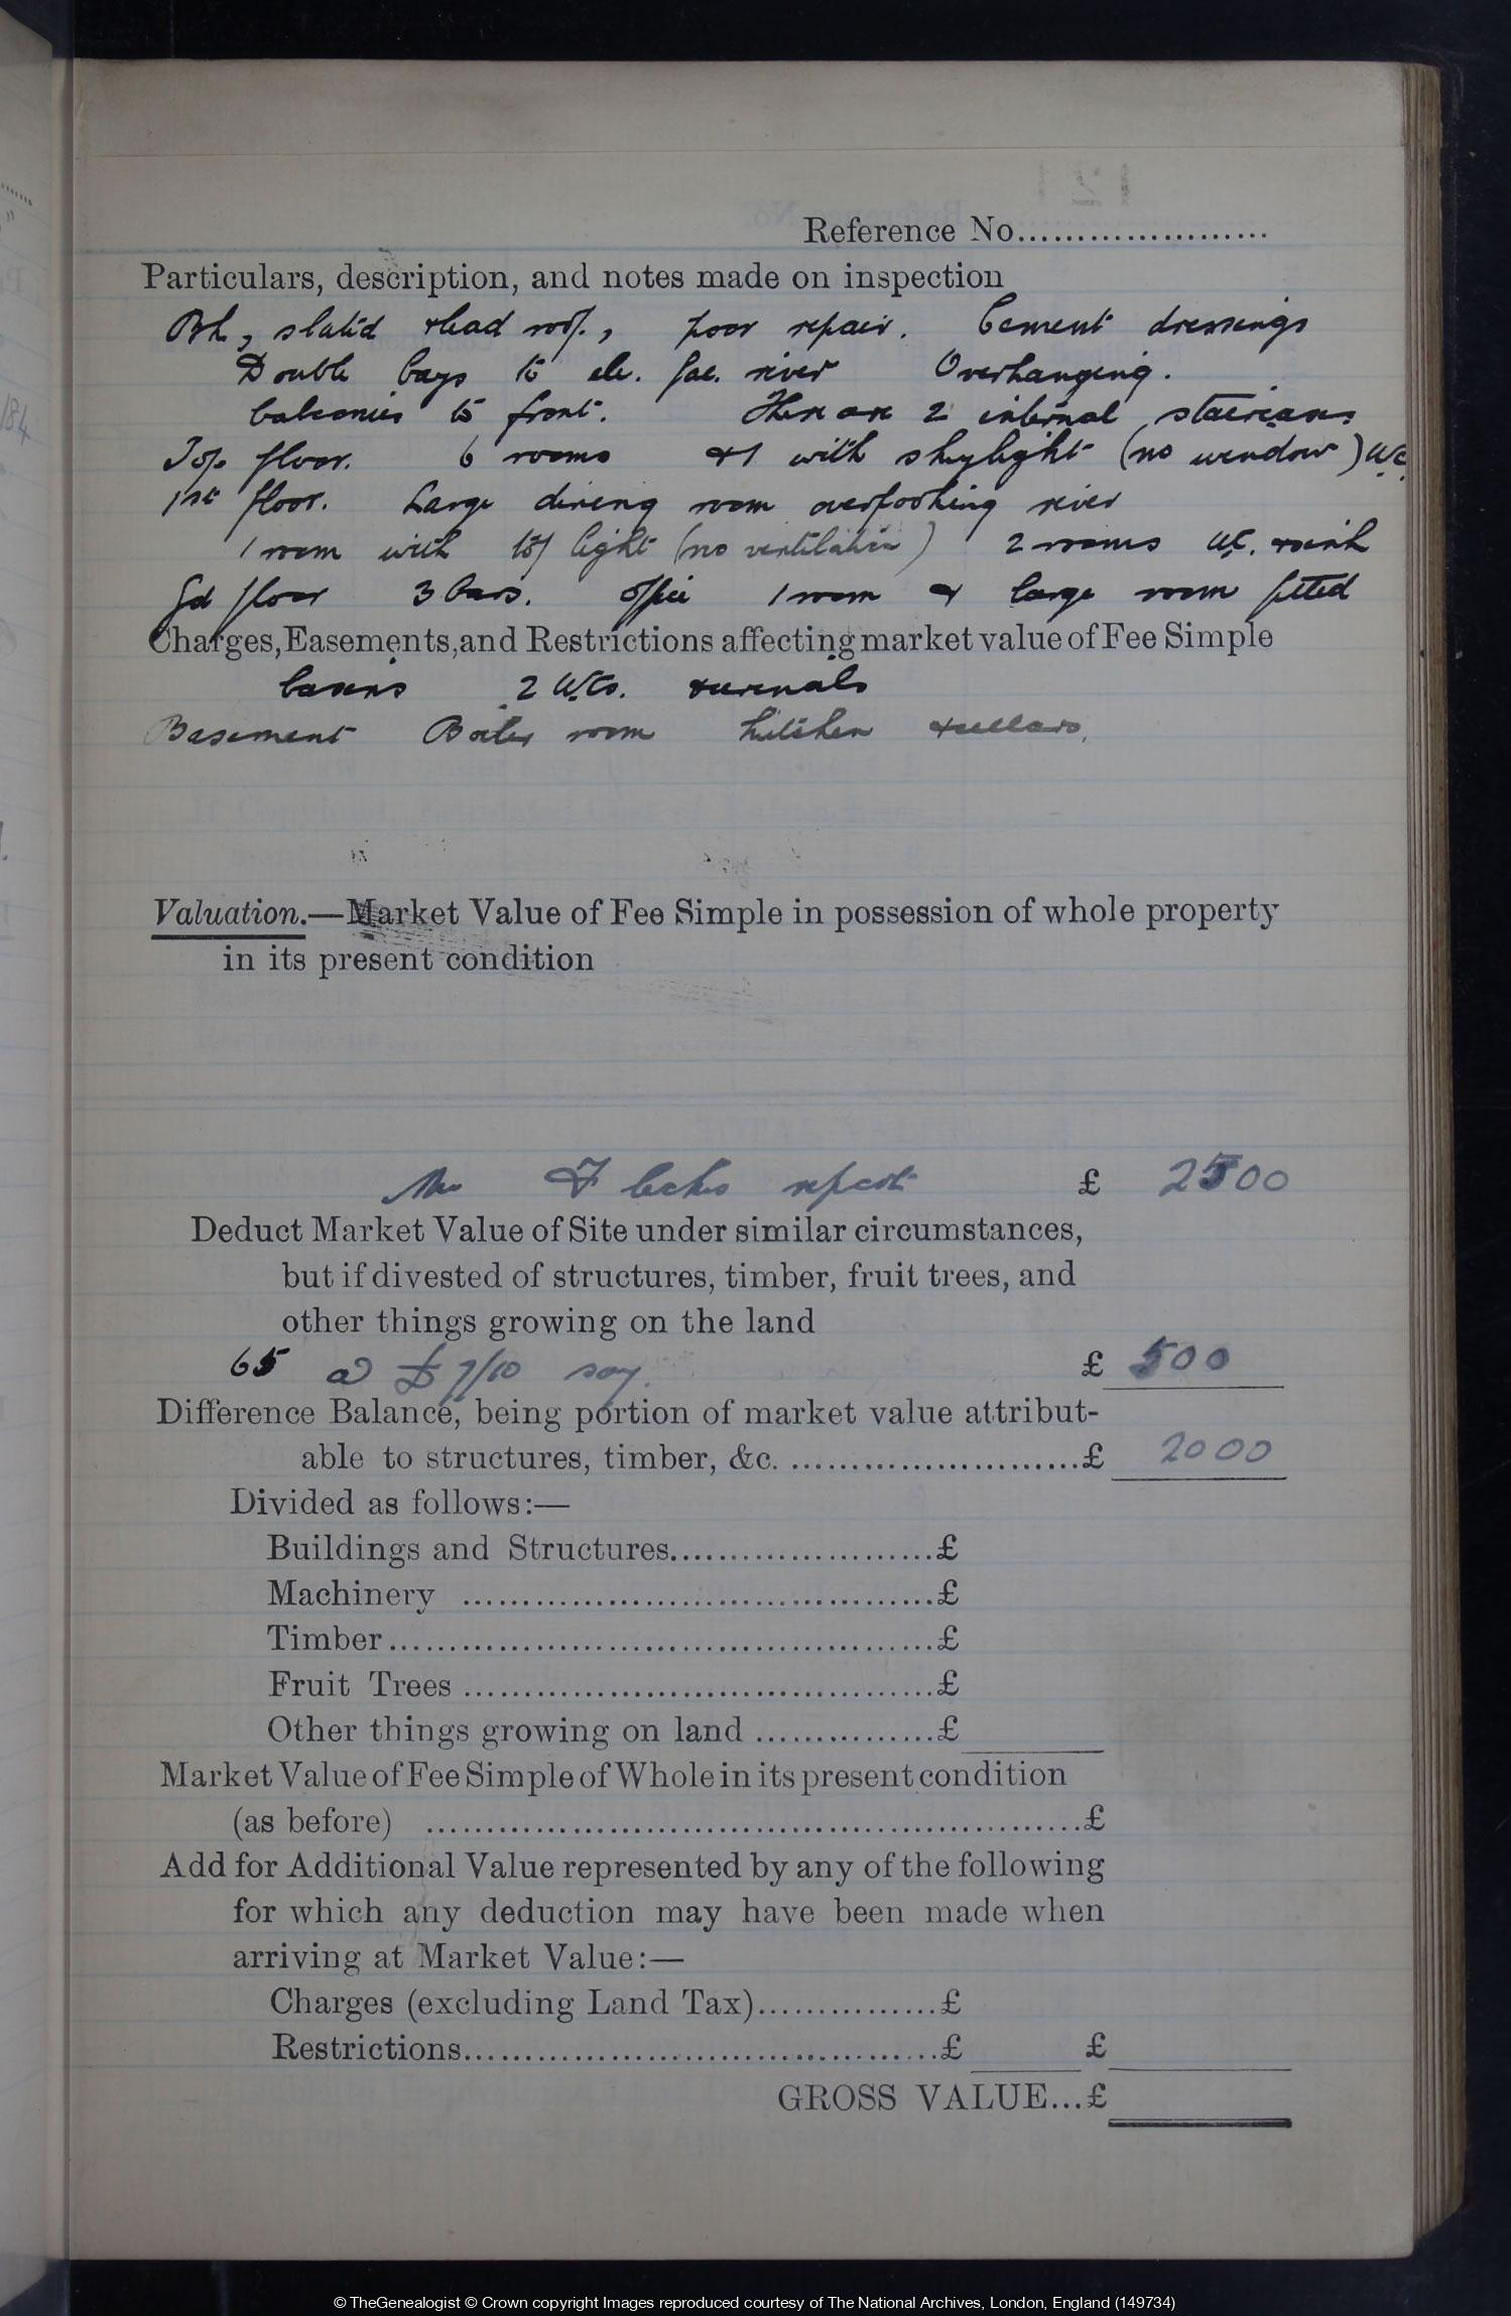 Particulars, description, and notes made on inspection in the field book